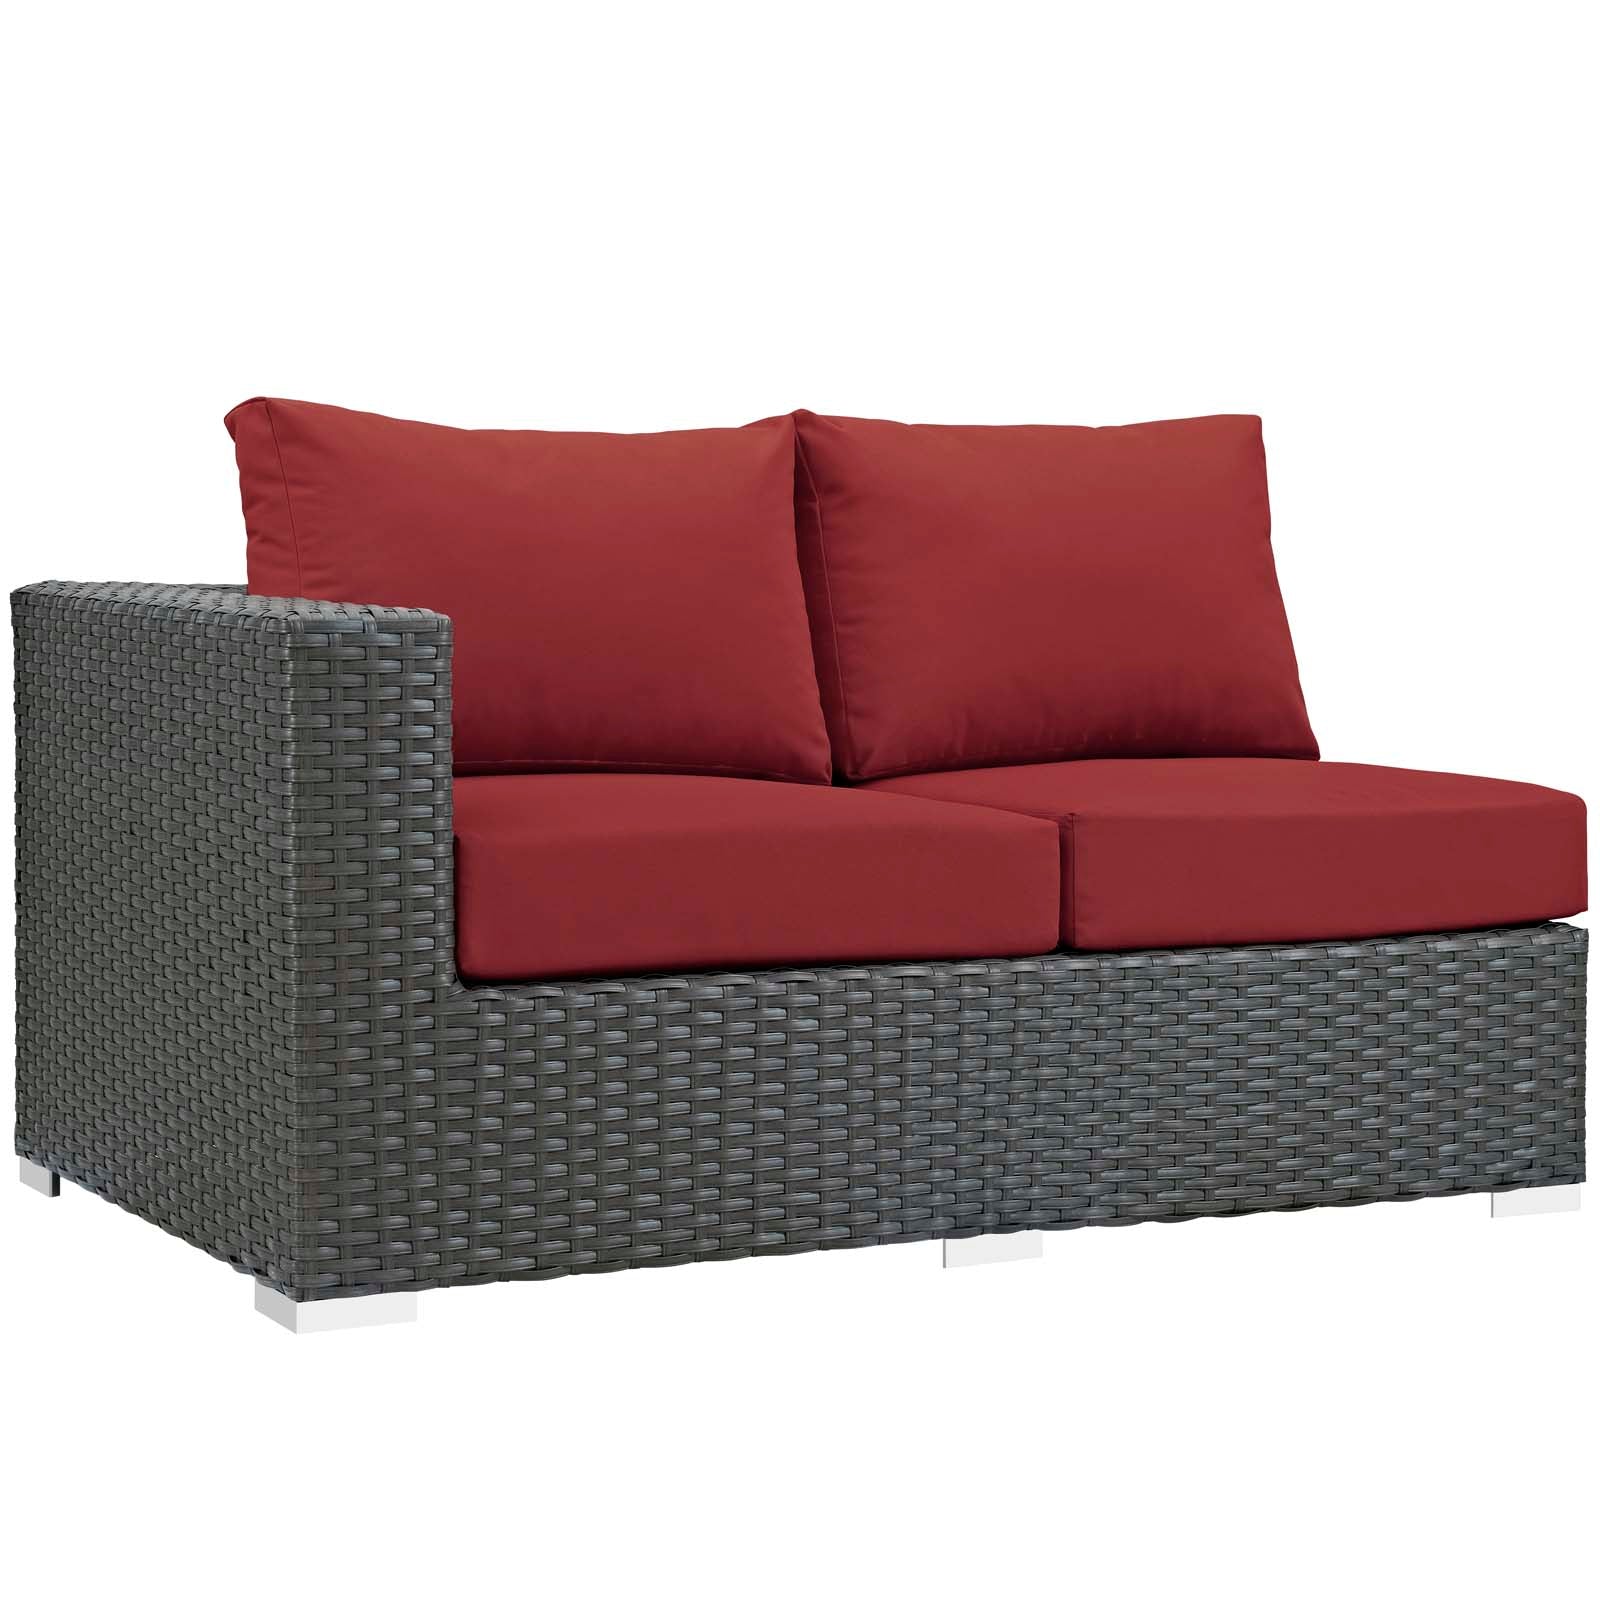 Modway Outdoor Sofas - Sojourn Outdoor Patio Sunbrella Left Arm Loveseat Canvas Red